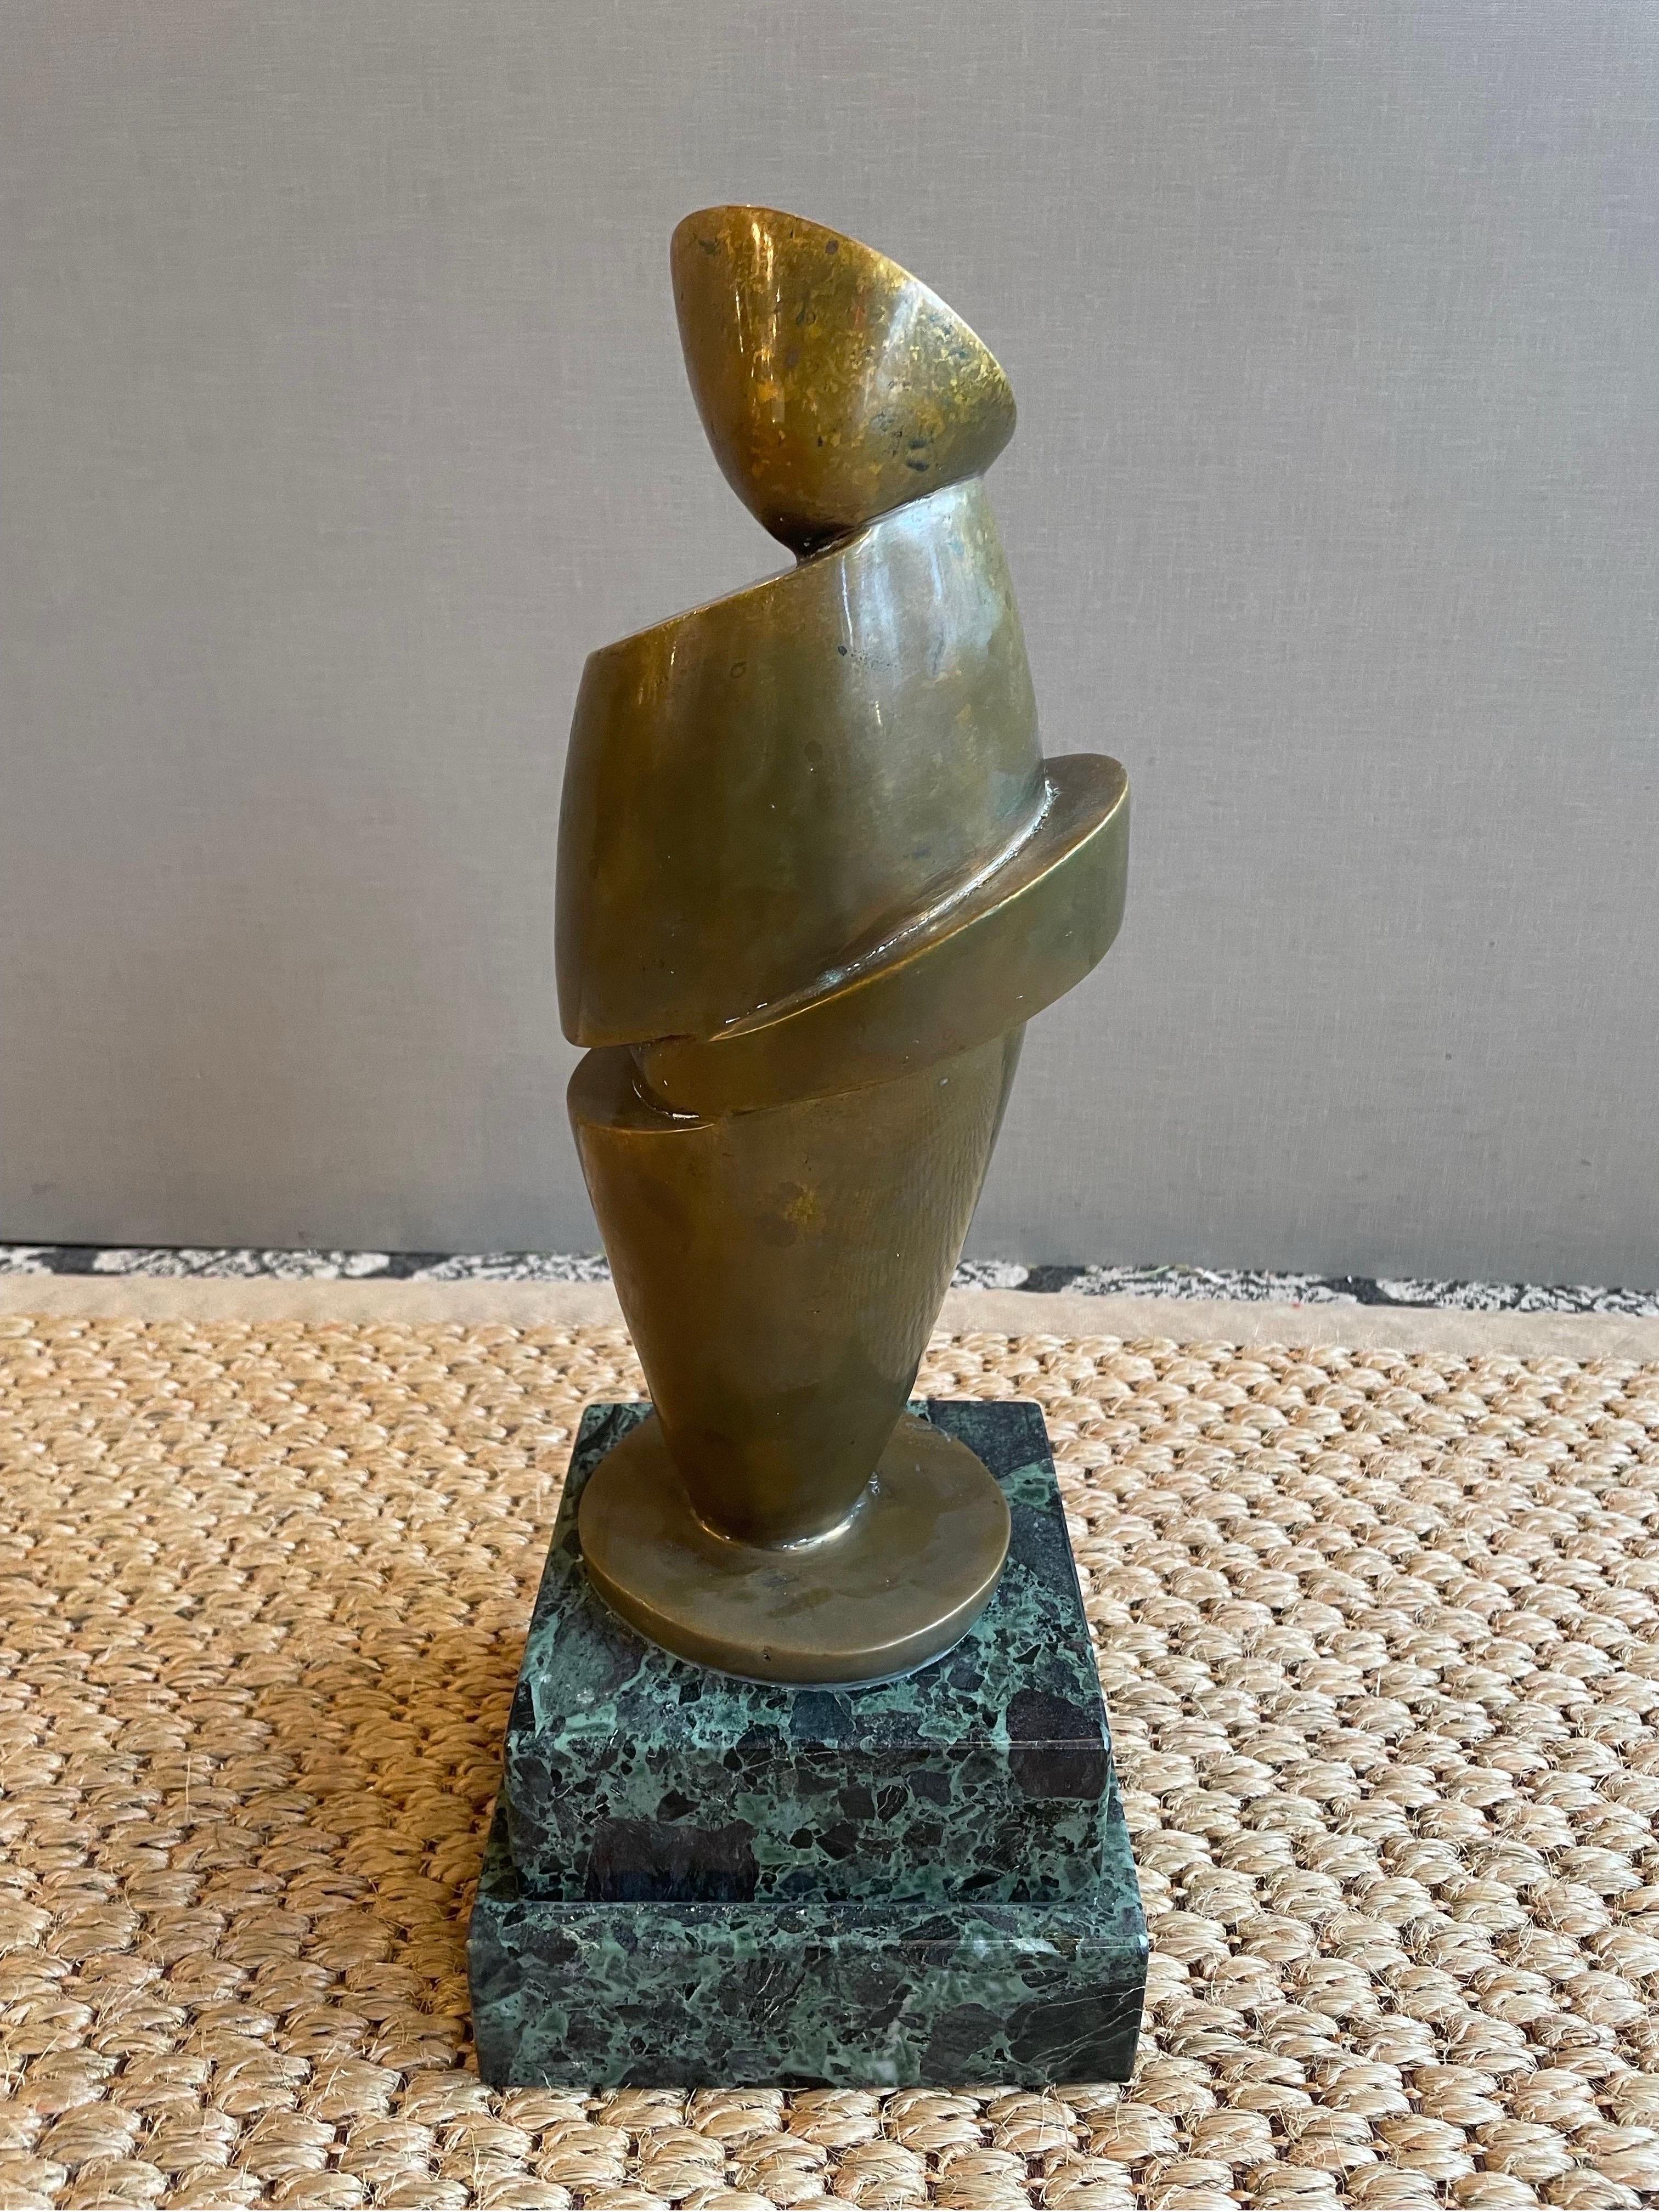 This is a heavy bronze abstract sculpture by Peter Calaboyias . He titled it psyche no.2 and did it in 1983. It is mounted on a green marble tiered base 